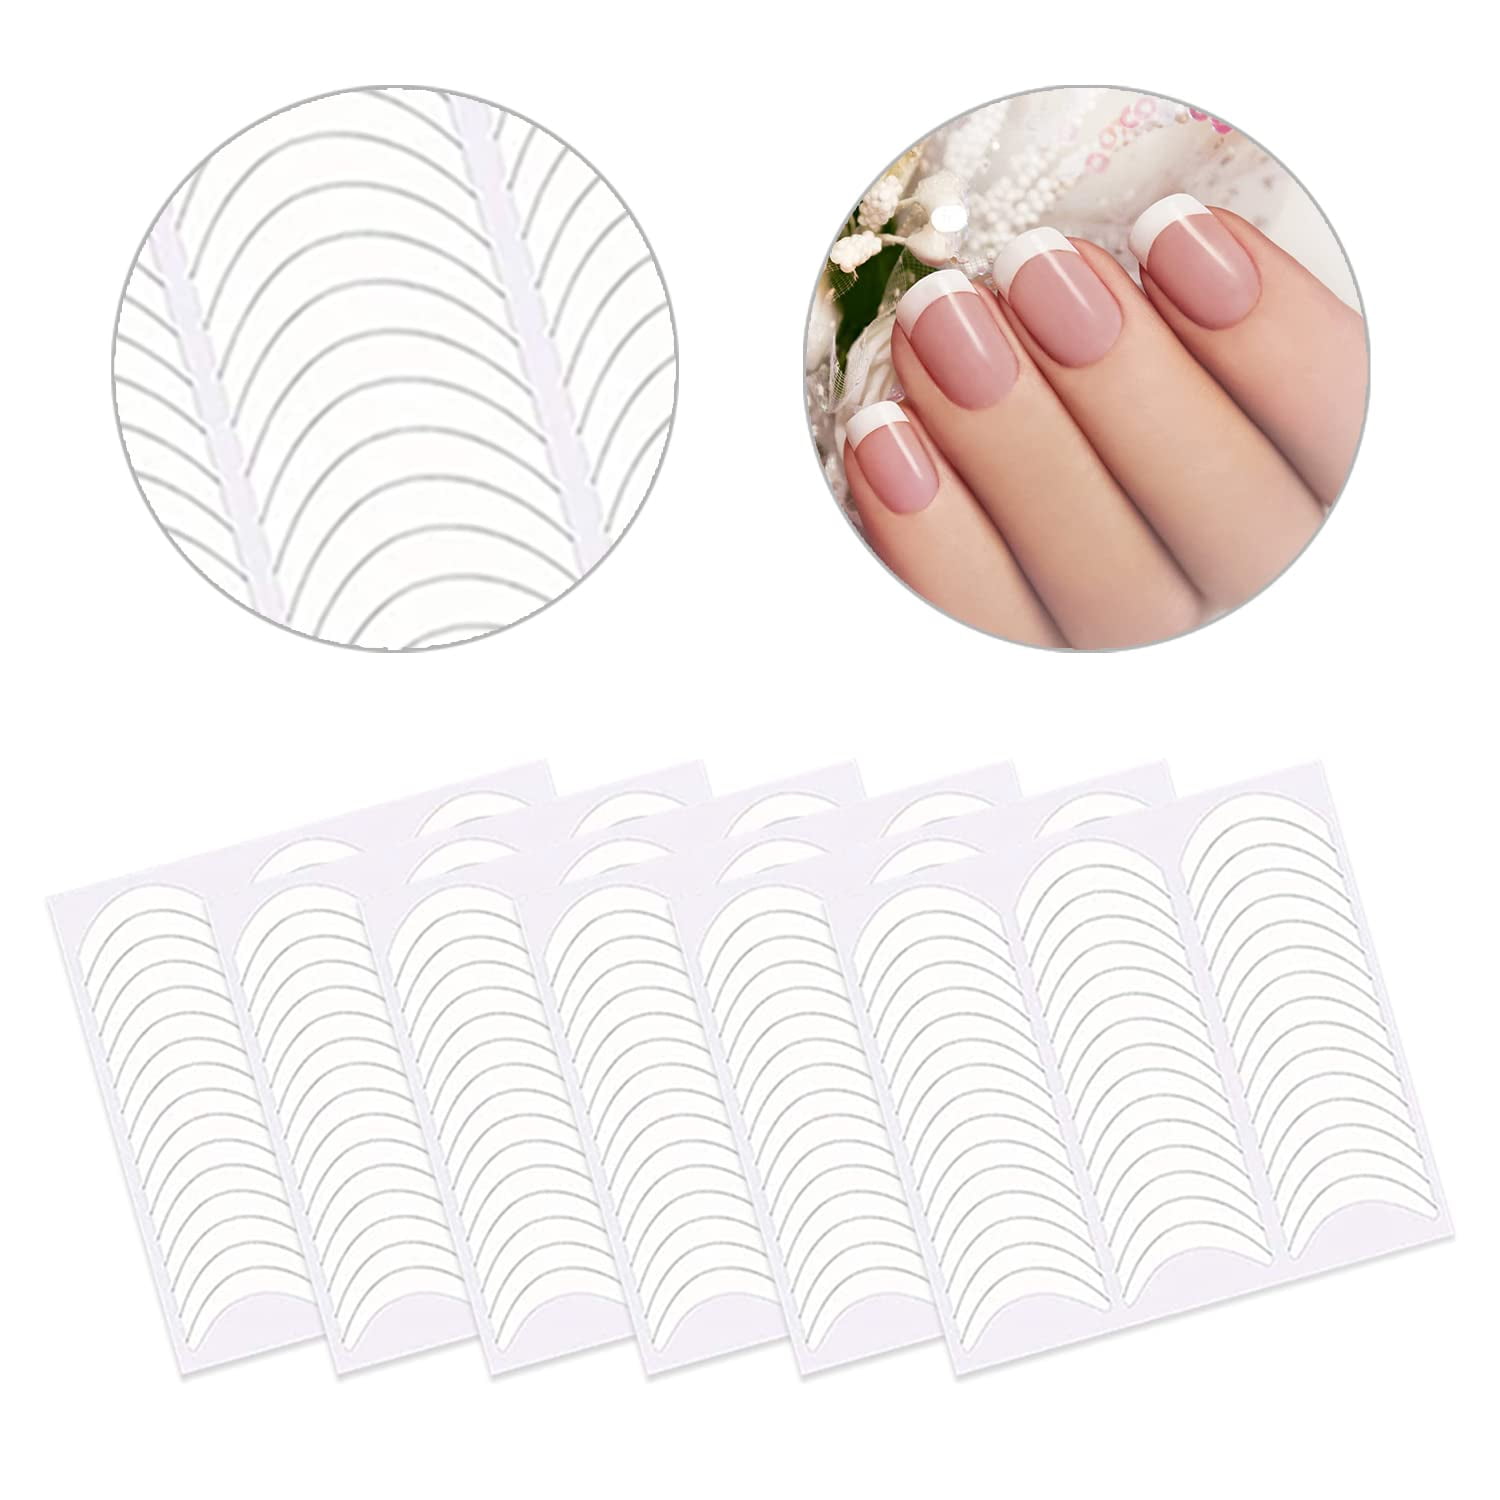 FRENCH MANICURE Guides, Natural Smile Line Self-Adhesive Stickers 3  Sheet/135 Pcs - TDI, Inc